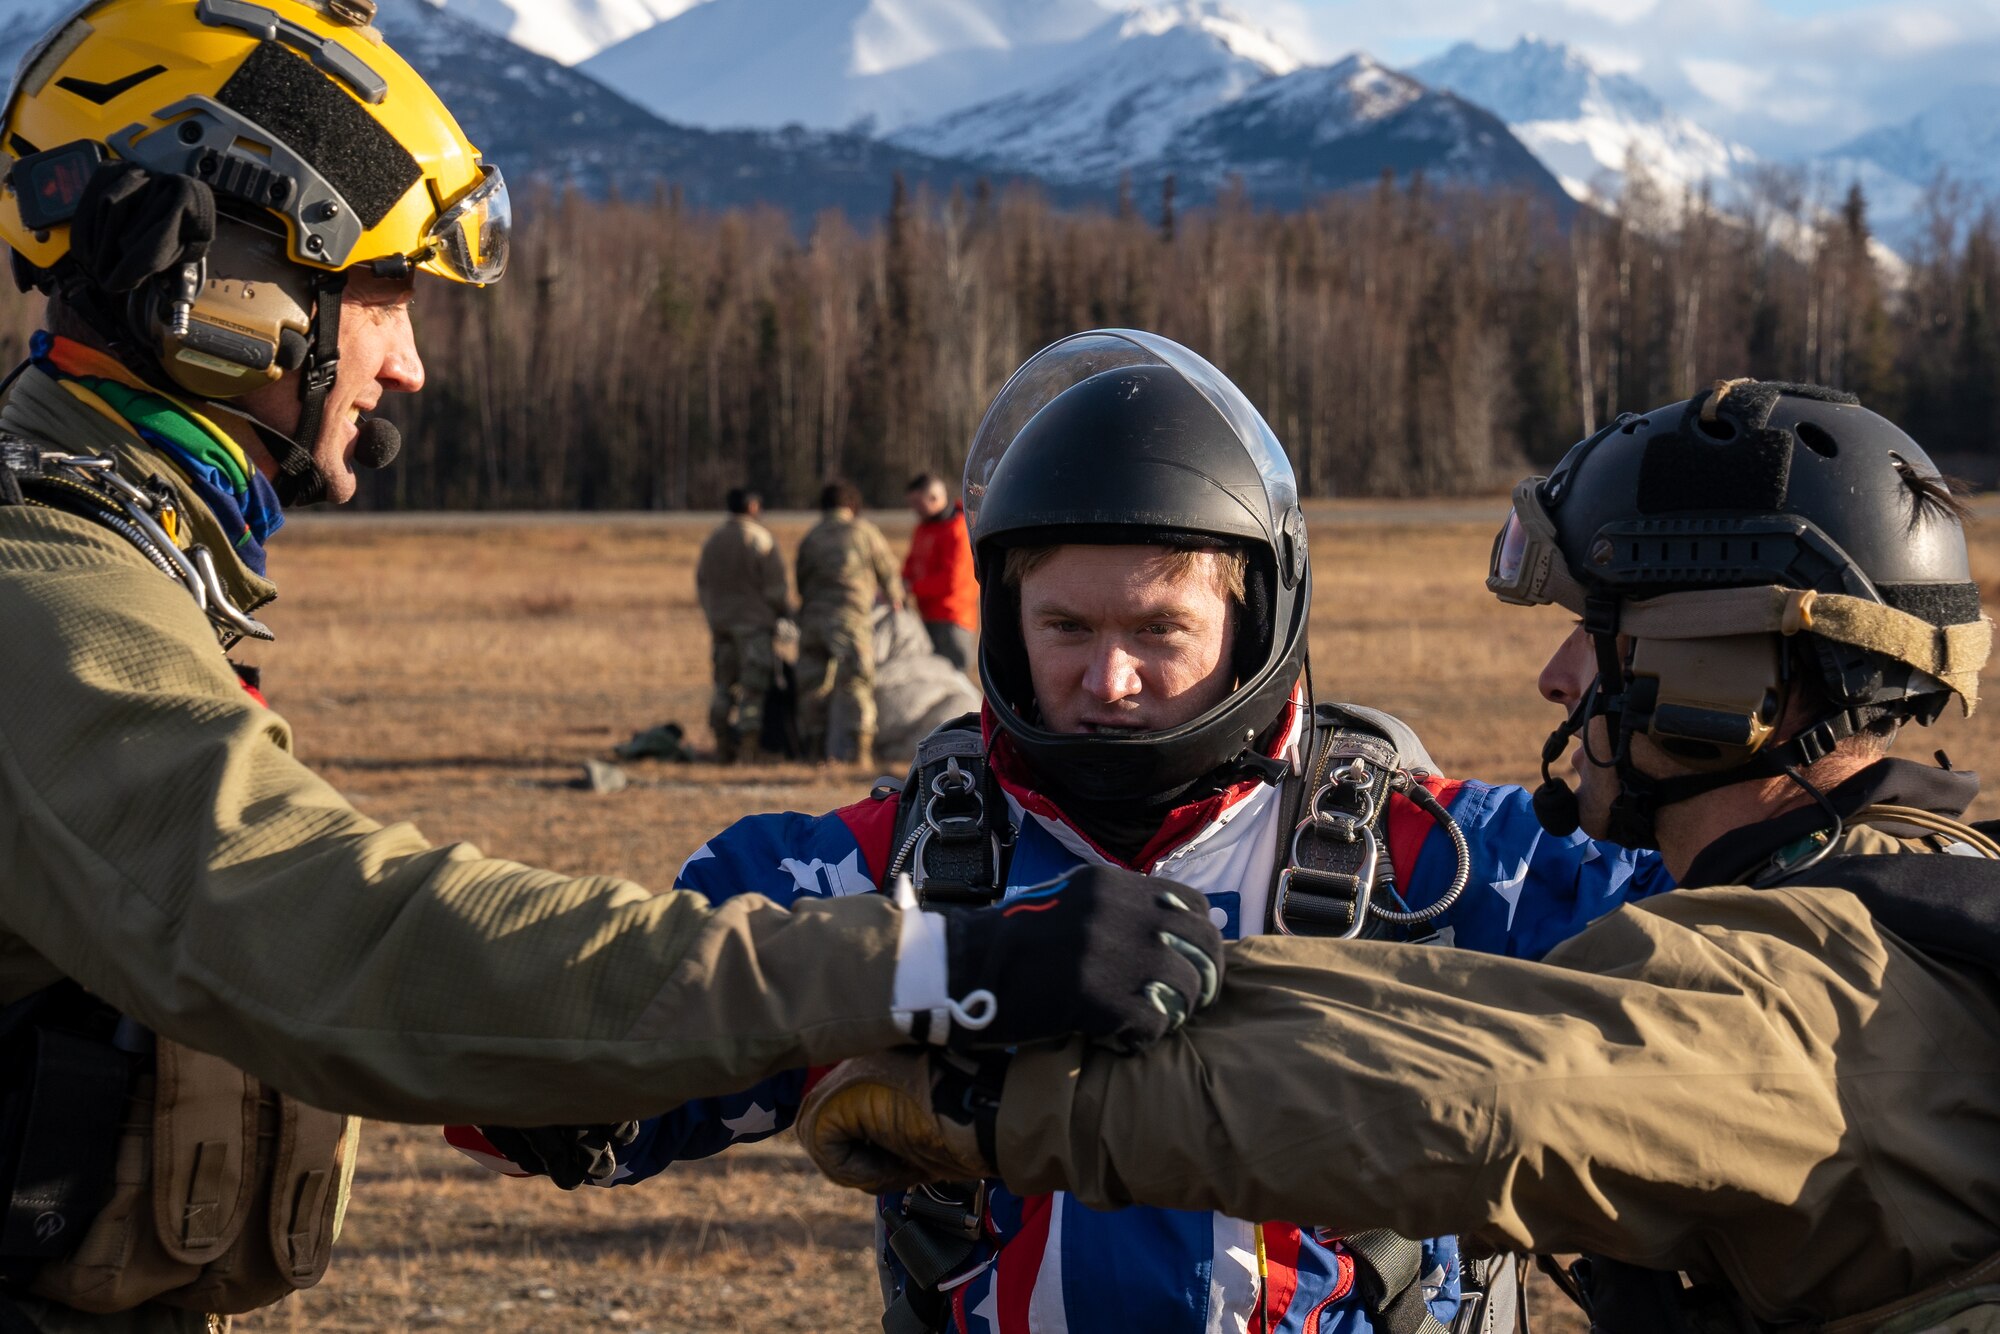 U.S. Air Force pararescuemen assigned to the 212th Rescue Squadron, Alaska Air National Guard, practice freefall procedures before jumping during a training event at Joint Base Elmendorf-Richardson.